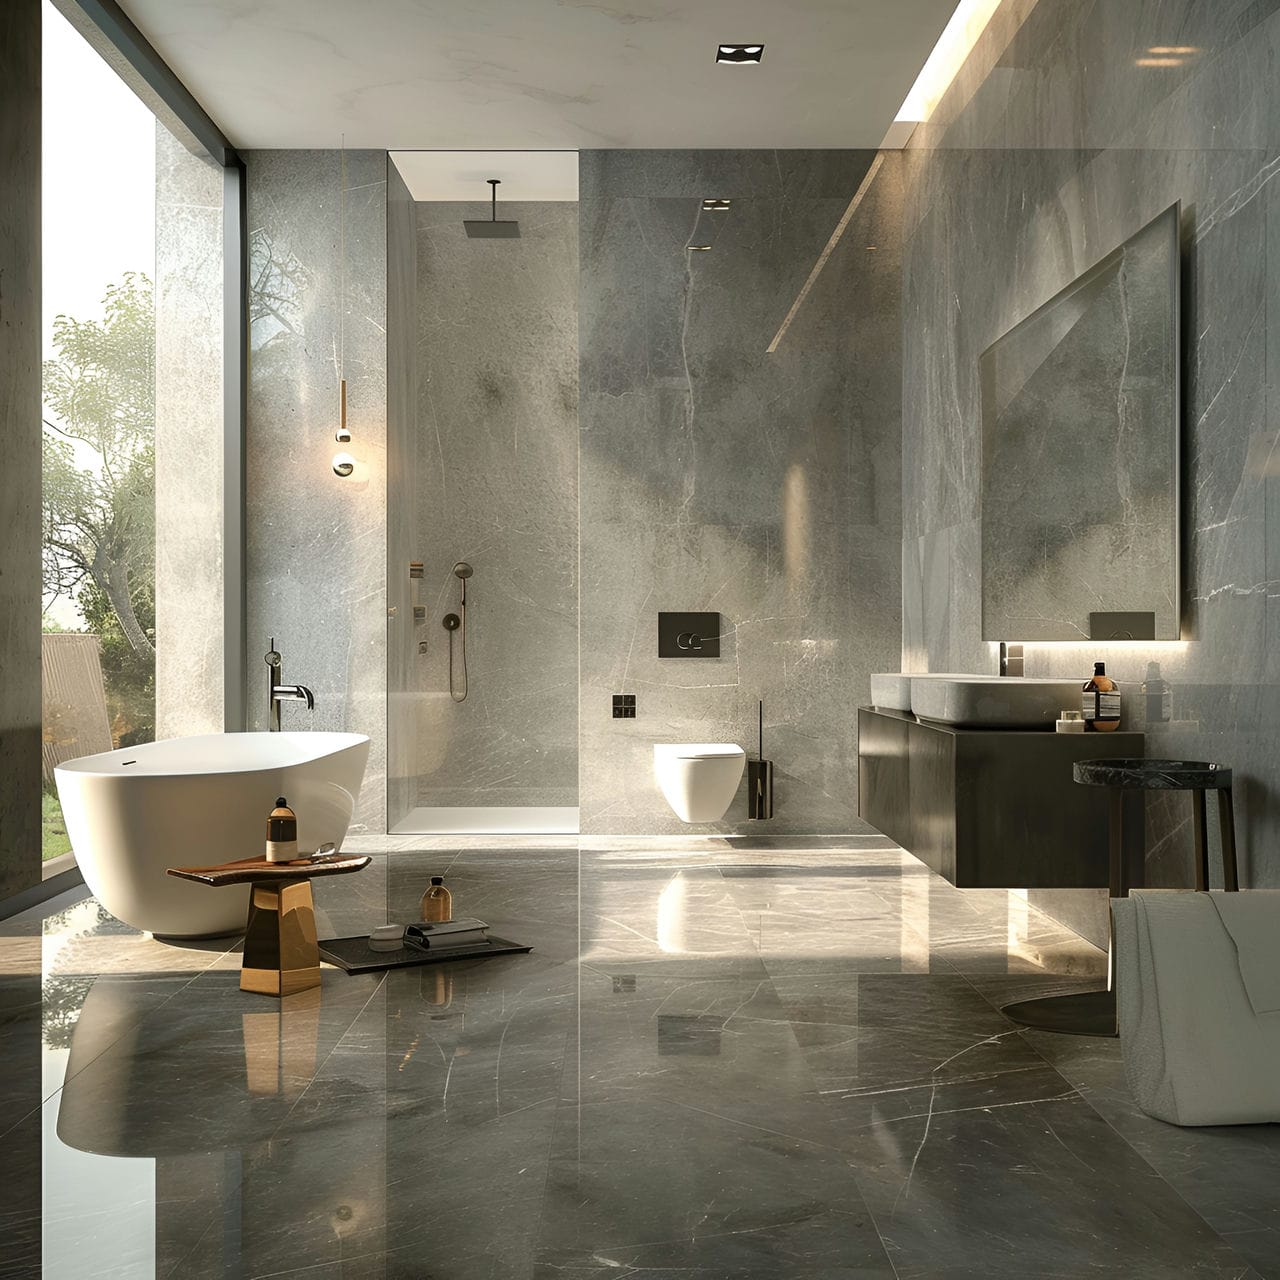 Bathroom: size, functionality, uses, furniture and renovation